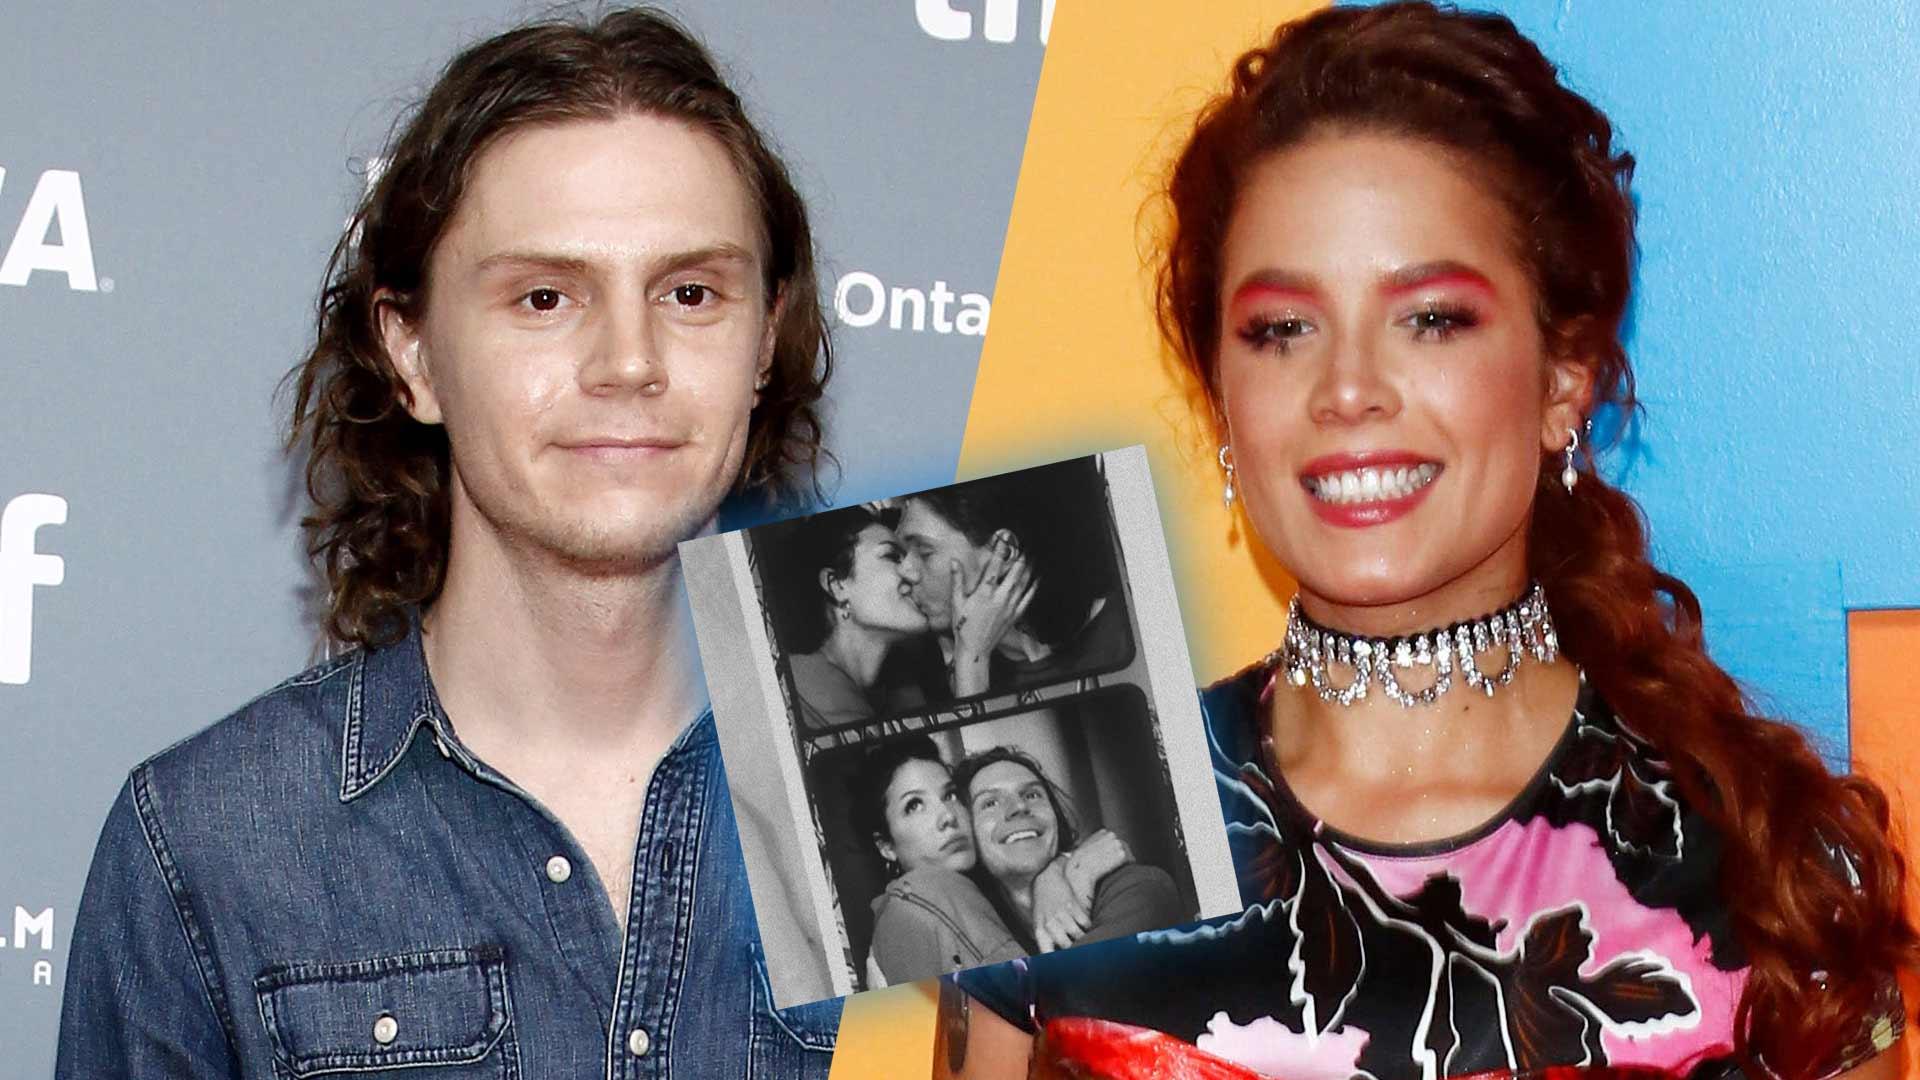 Halsey Shares Rare Relationship Post With BF Evan Peters: ‘Happy Birthday Darling’